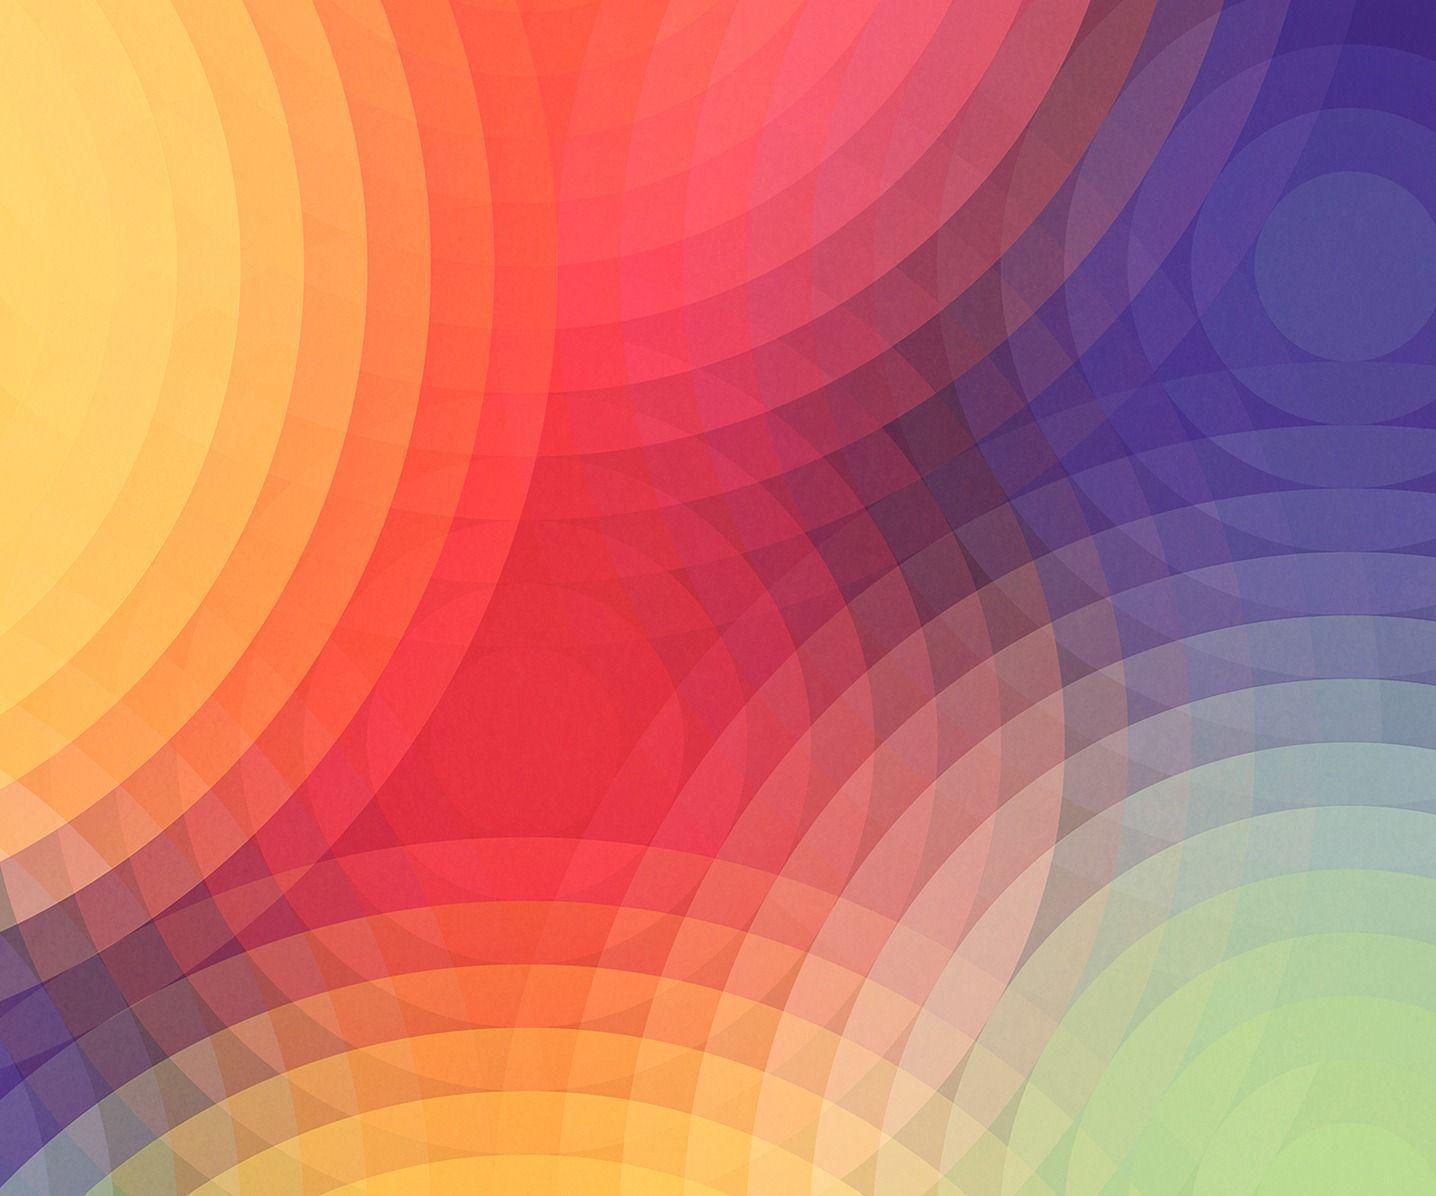 AndroidSPIN. Android 4.2 Wallpaper Ready for Download as well as